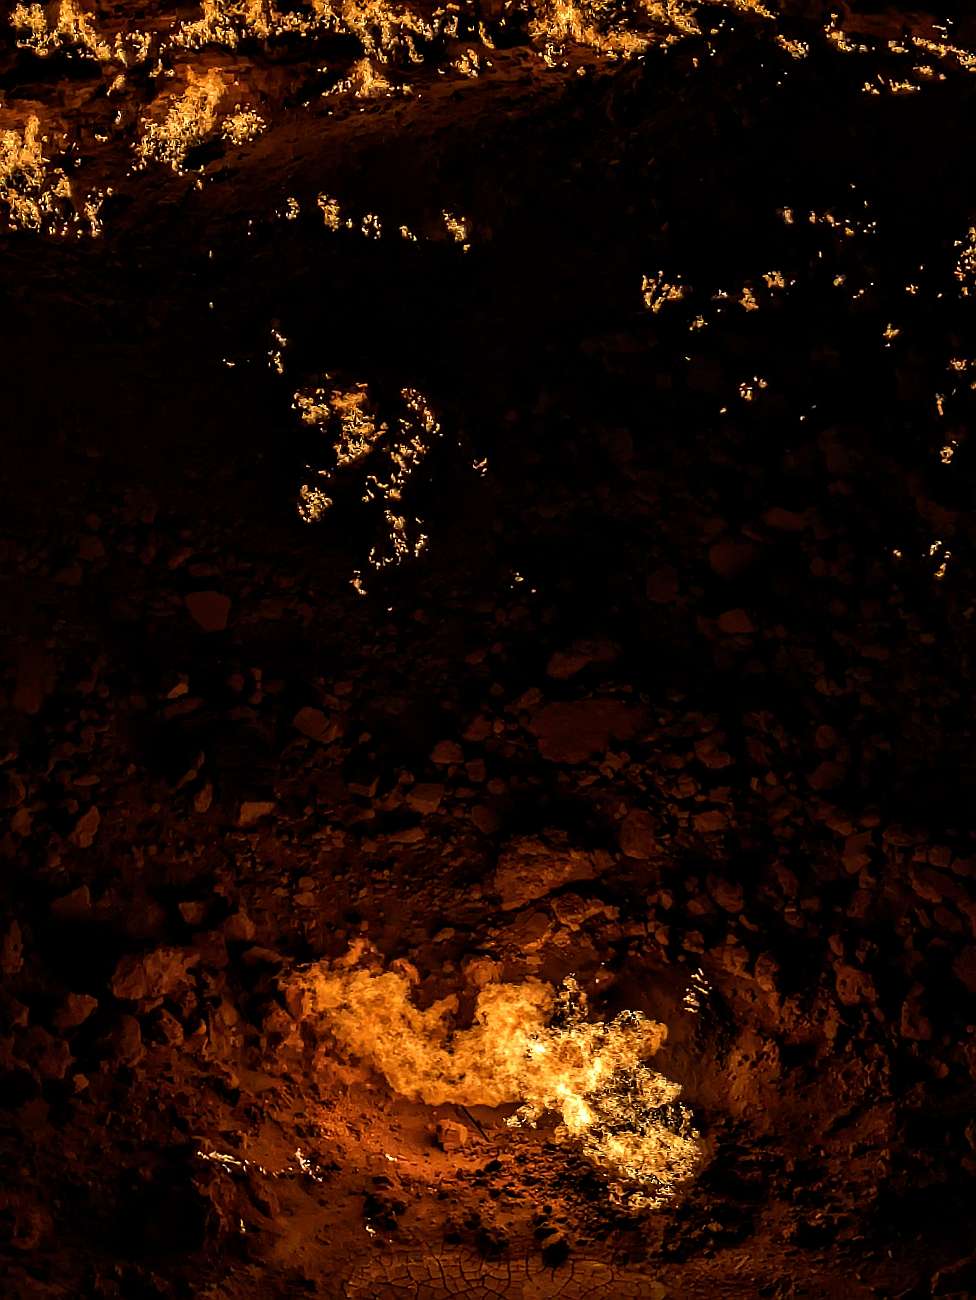 The Gates of Hell (Darwaza, Turkmenistan) - at night, the center of the crater